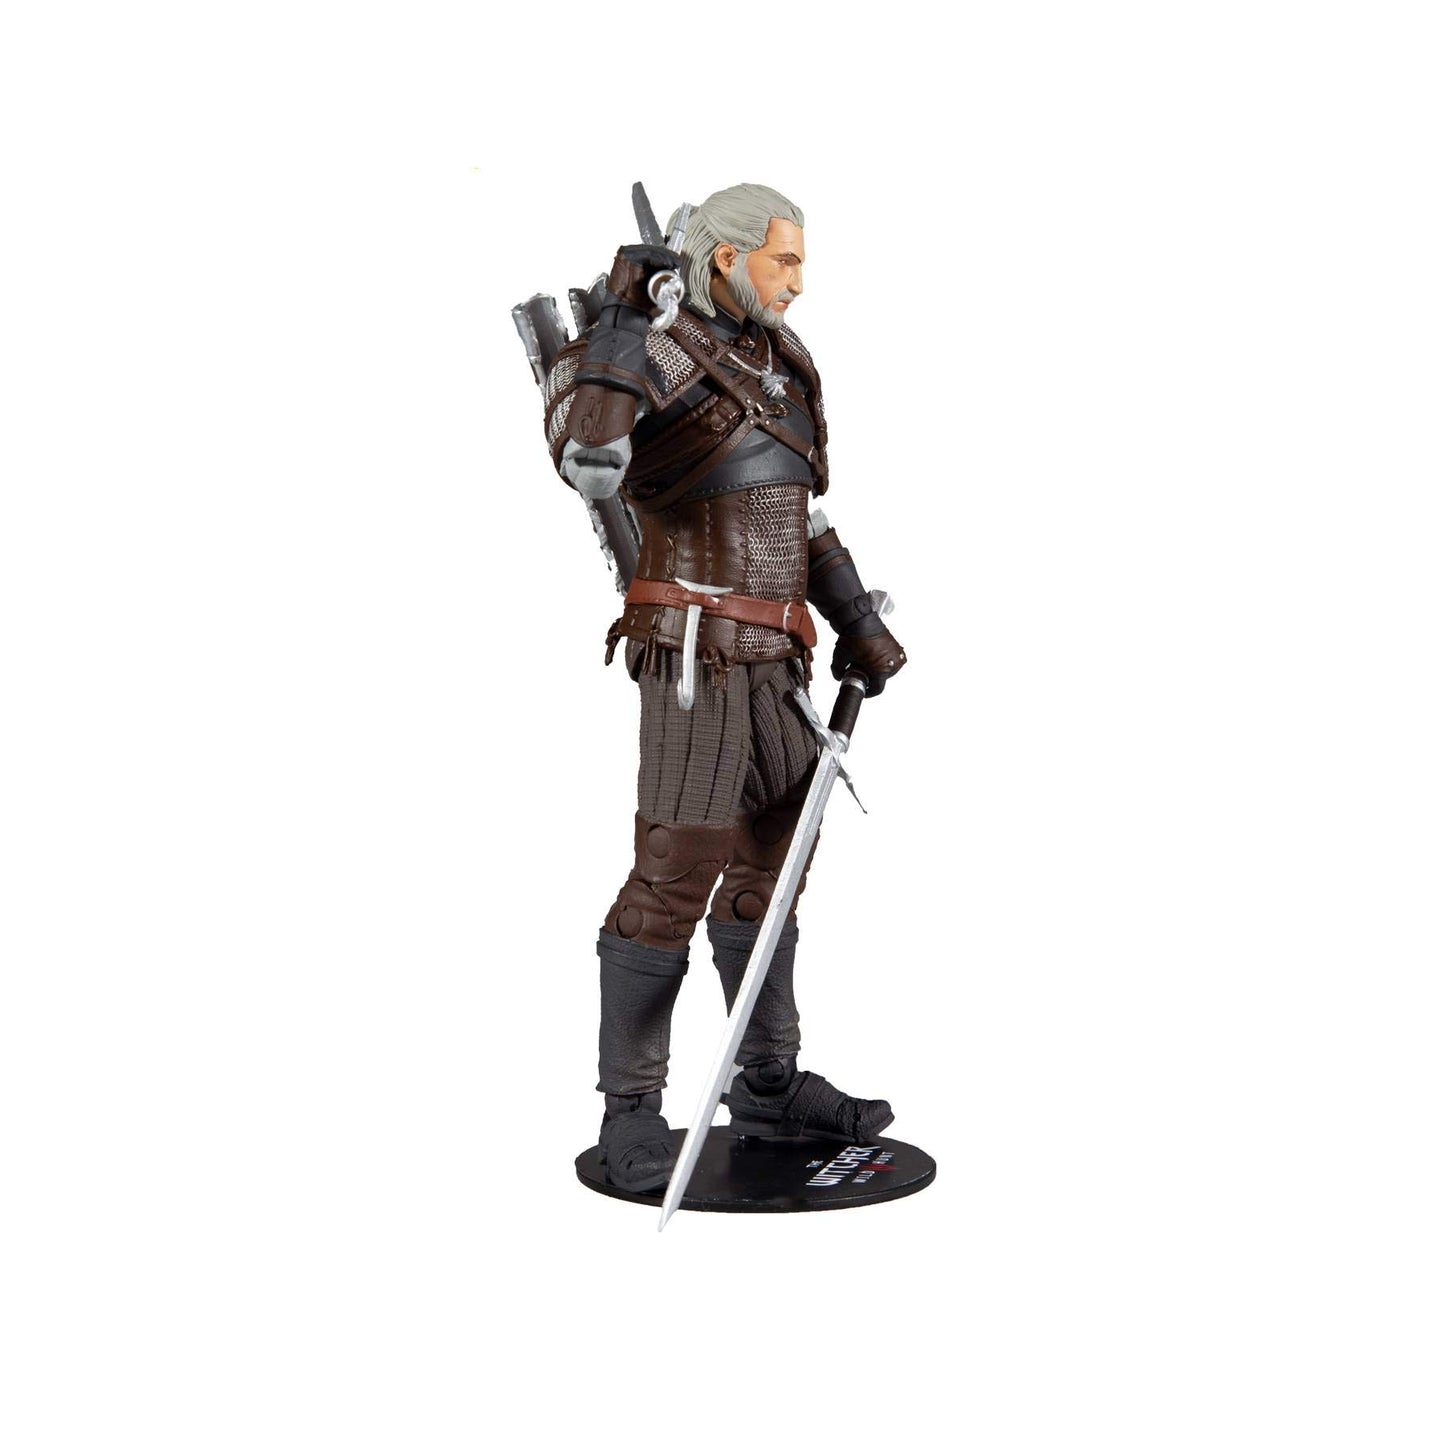 McFarlane Toys - The Witcher - Geralt of Rivia 7" Action Figure